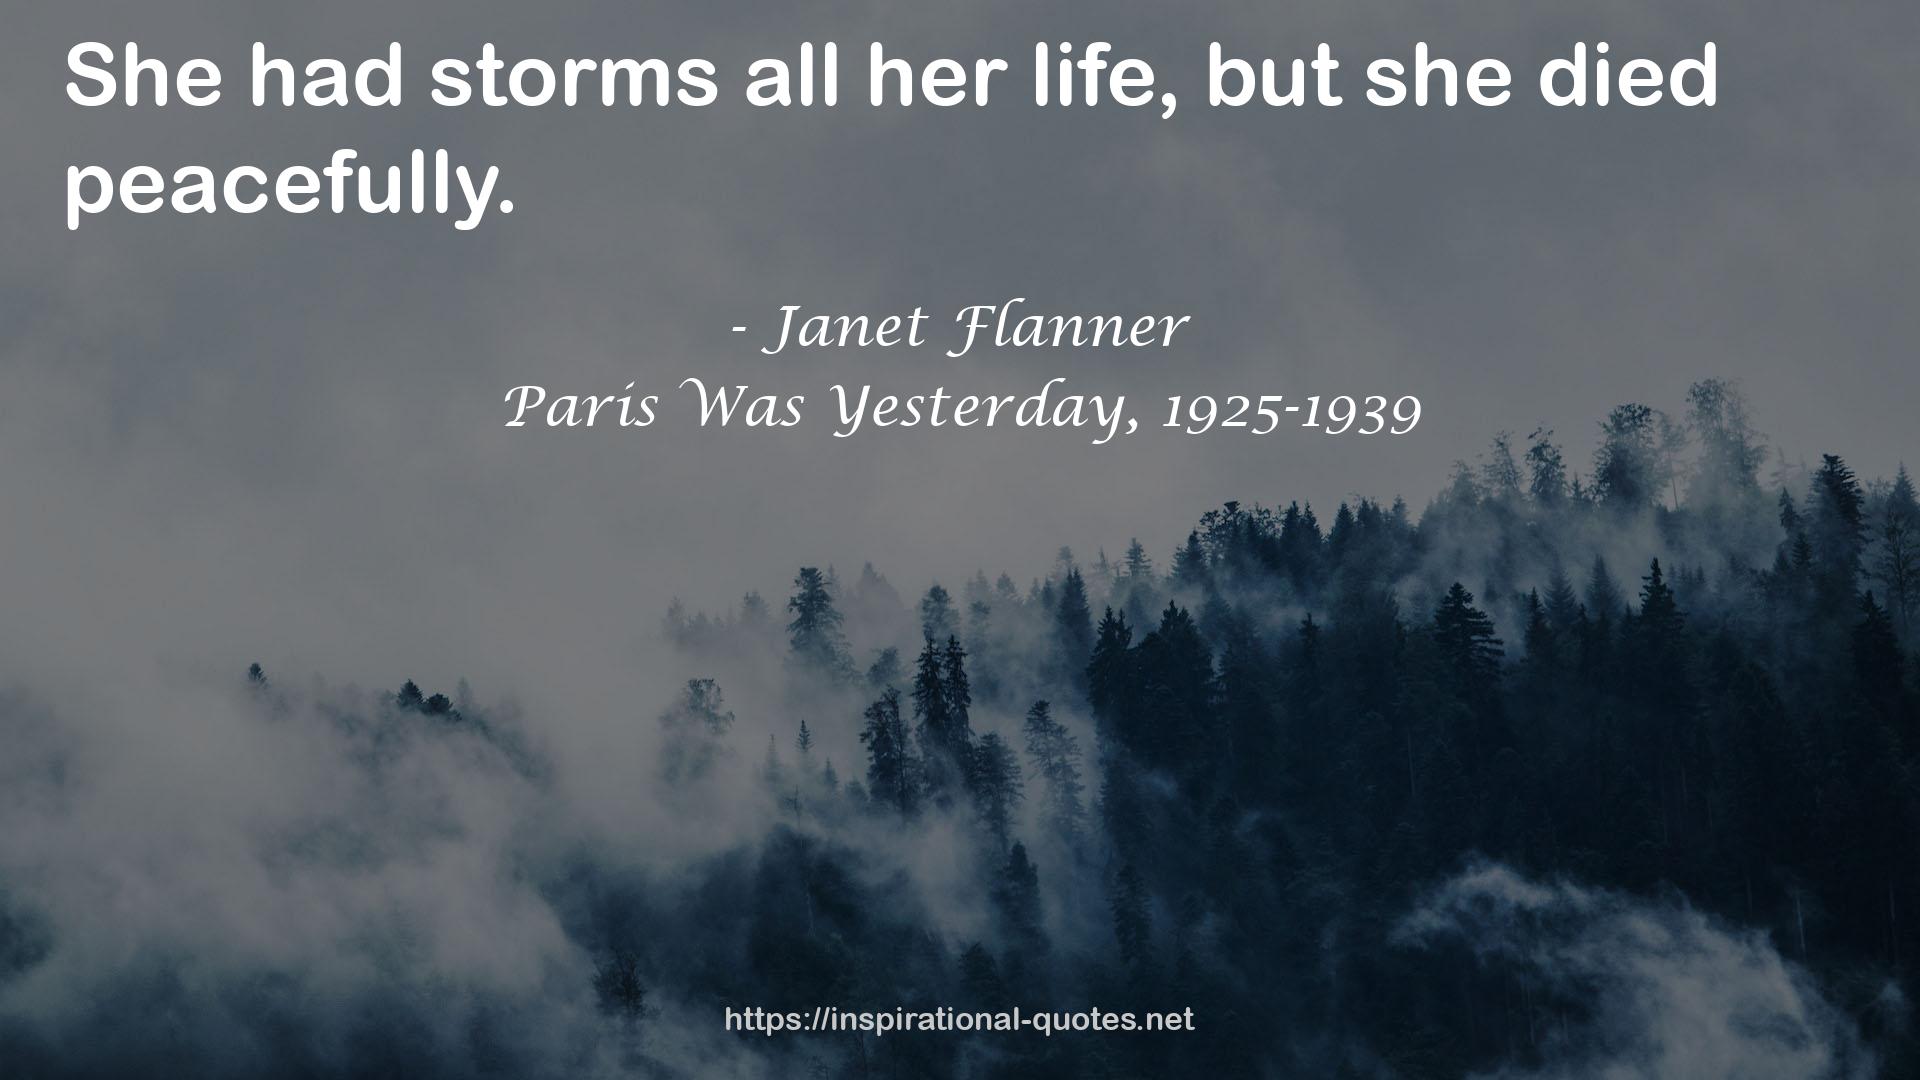 Paris Was Yesterday, 1925-1939 QUOTES